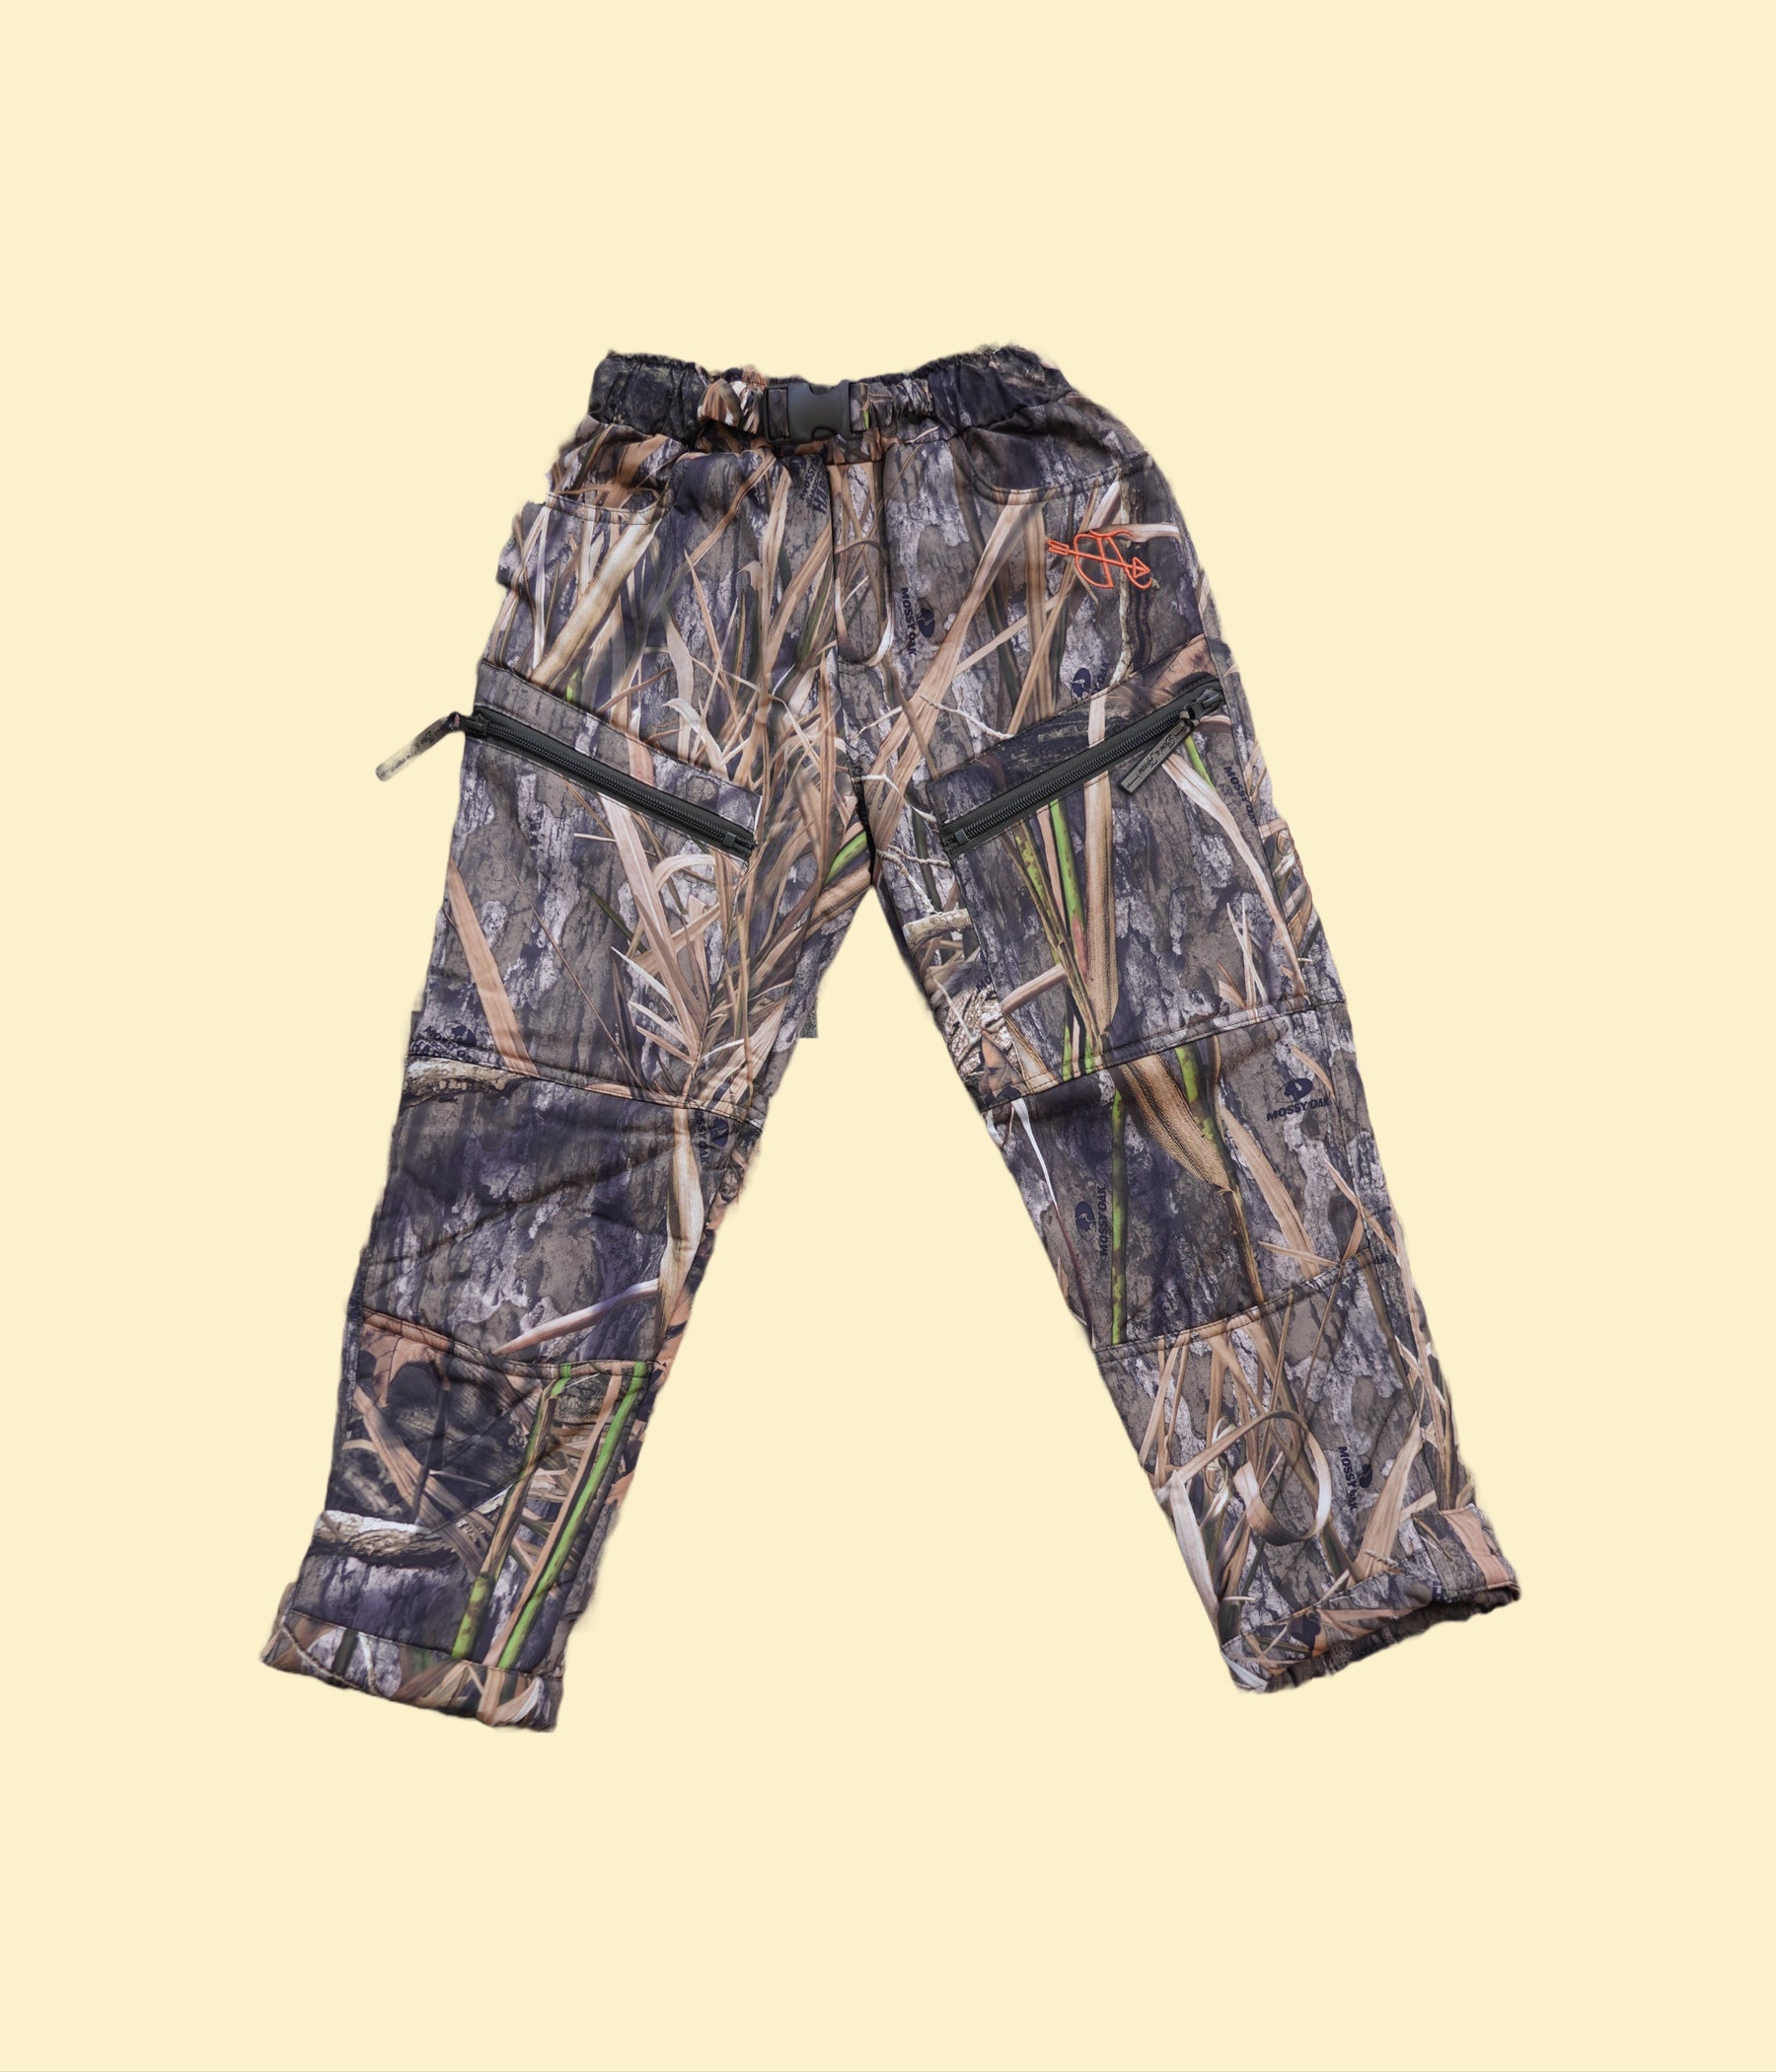 Medium Weight Hunting Pant by Bow and Arrow Outdoors - Sportsman Gear